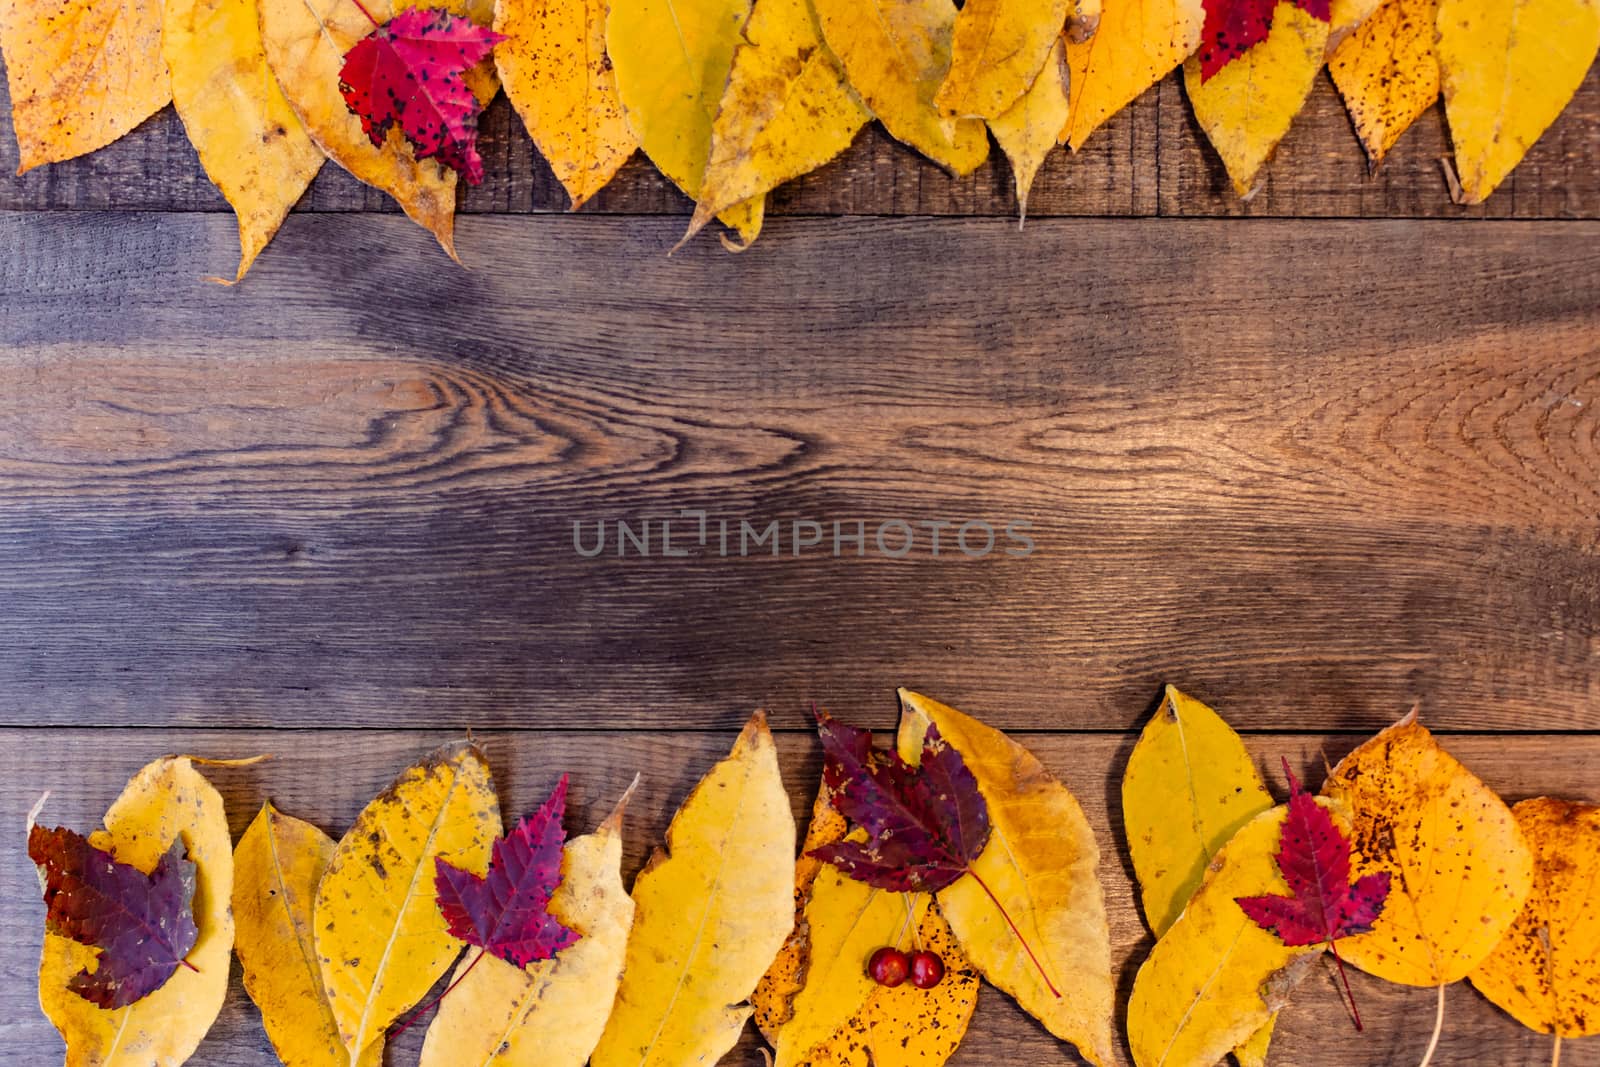 Red, yellow, orange autumn leaves, as well as berries and cones lie on wooden boards. Background image.